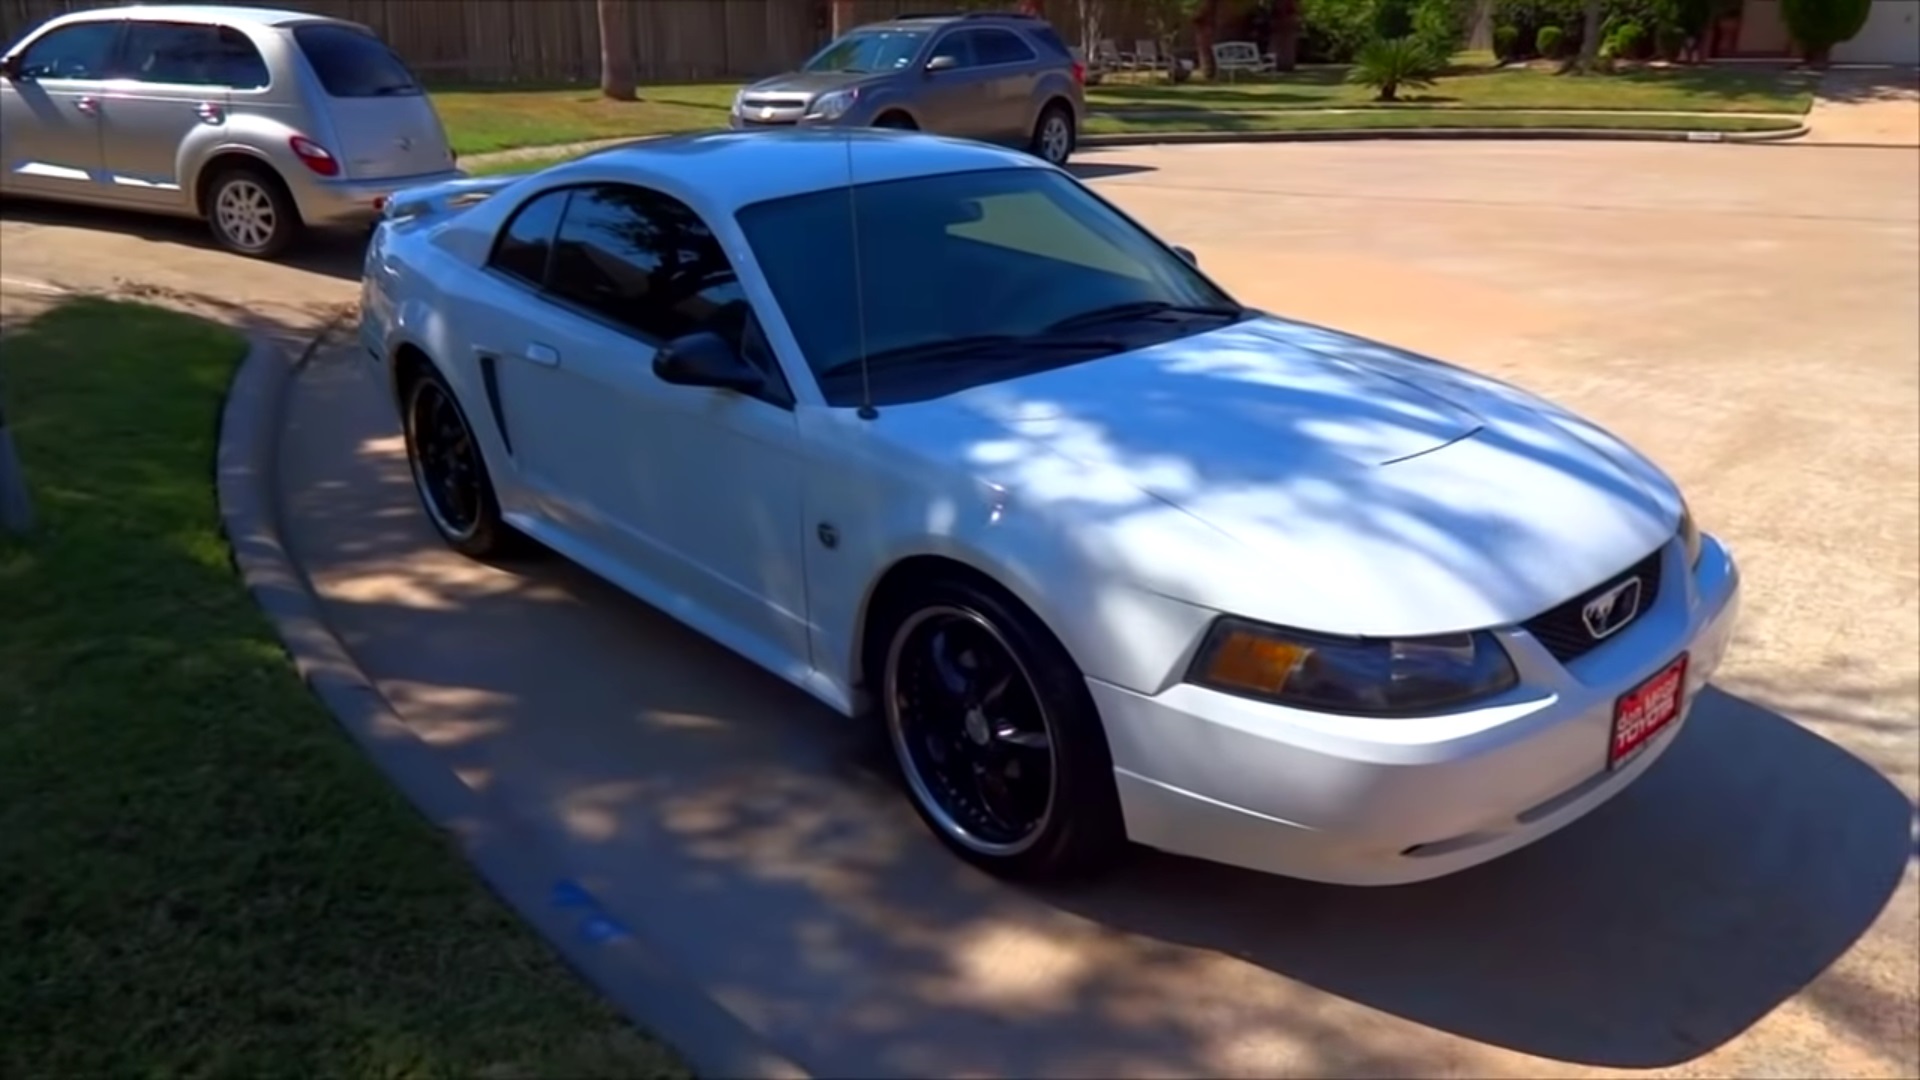 Video: 2004 Ford Mustang Full Tour